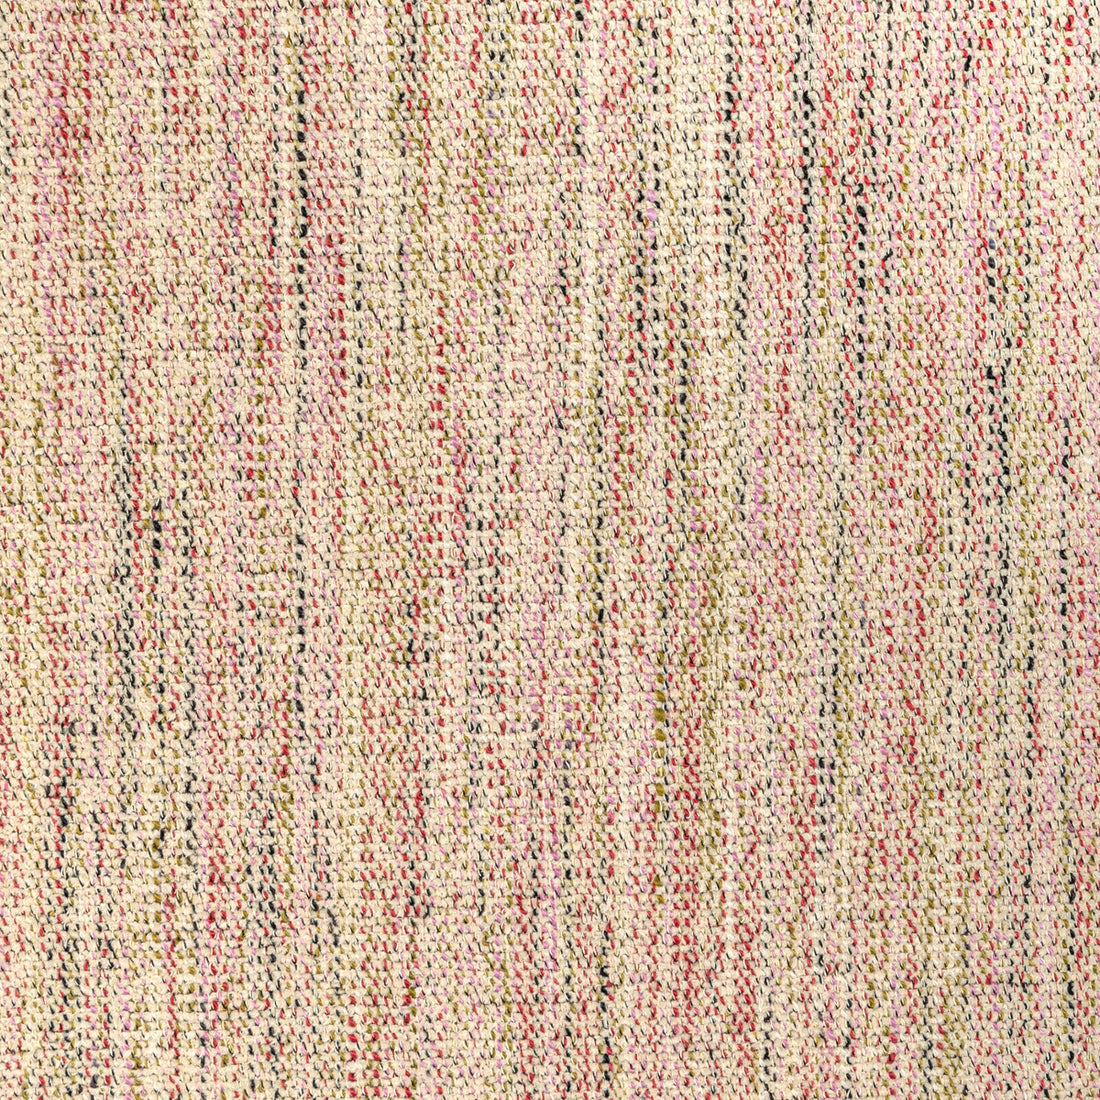 Delfino fabric in watermelon color - pattern 36748.317.0 - by Kravet Contract in the Refined Textures Performance Crypton collection